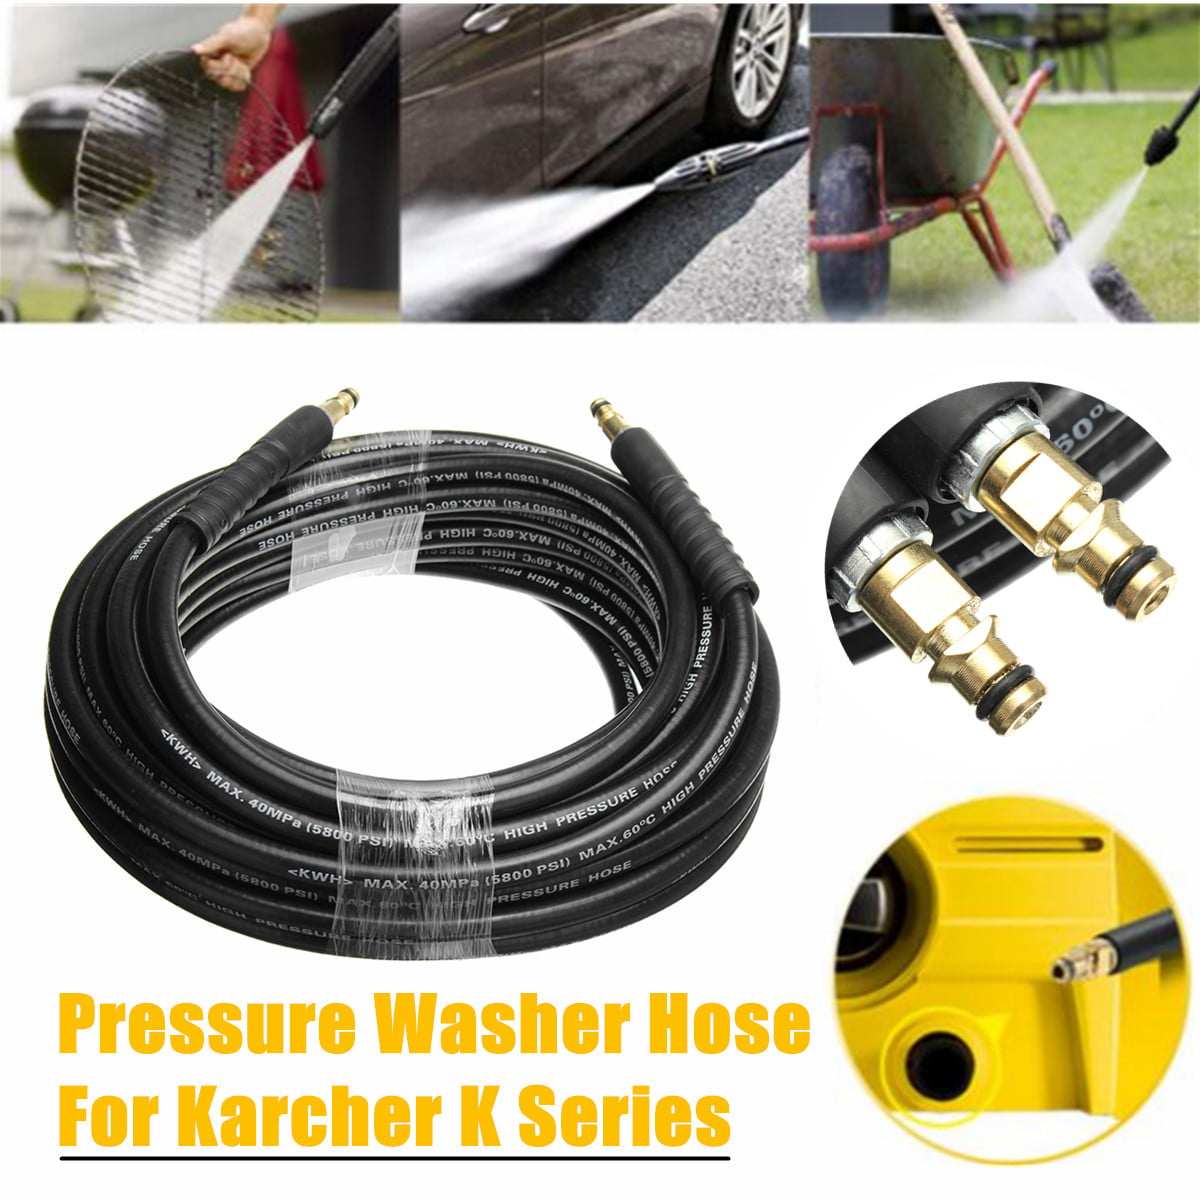 5M 2300PSI/160BAR High Pressure Replacement Pipe Hose For Karcher K2 Cleaner UK 